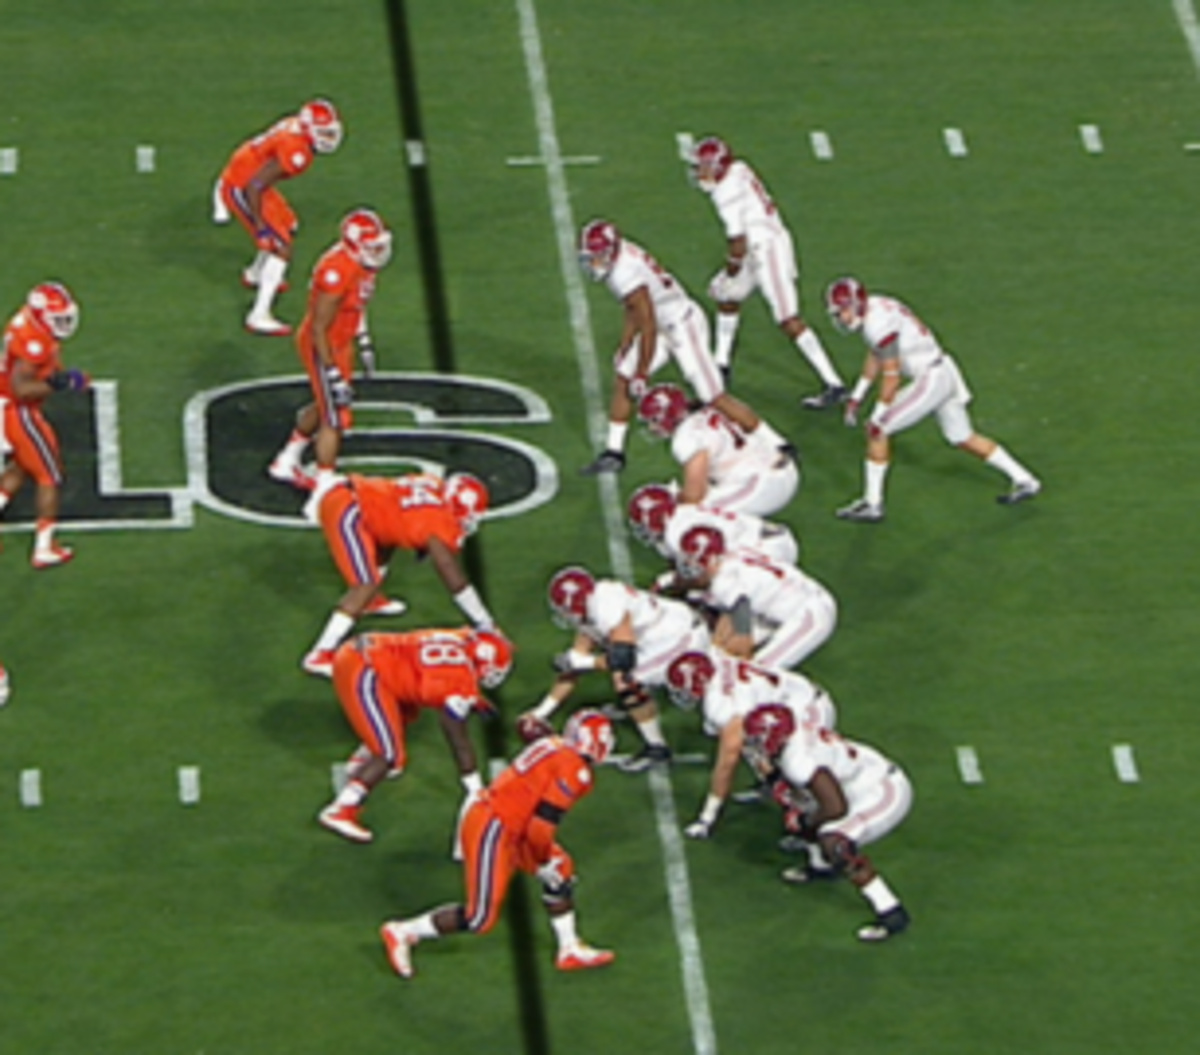 Shaq Lawson lined up offsides during title game.